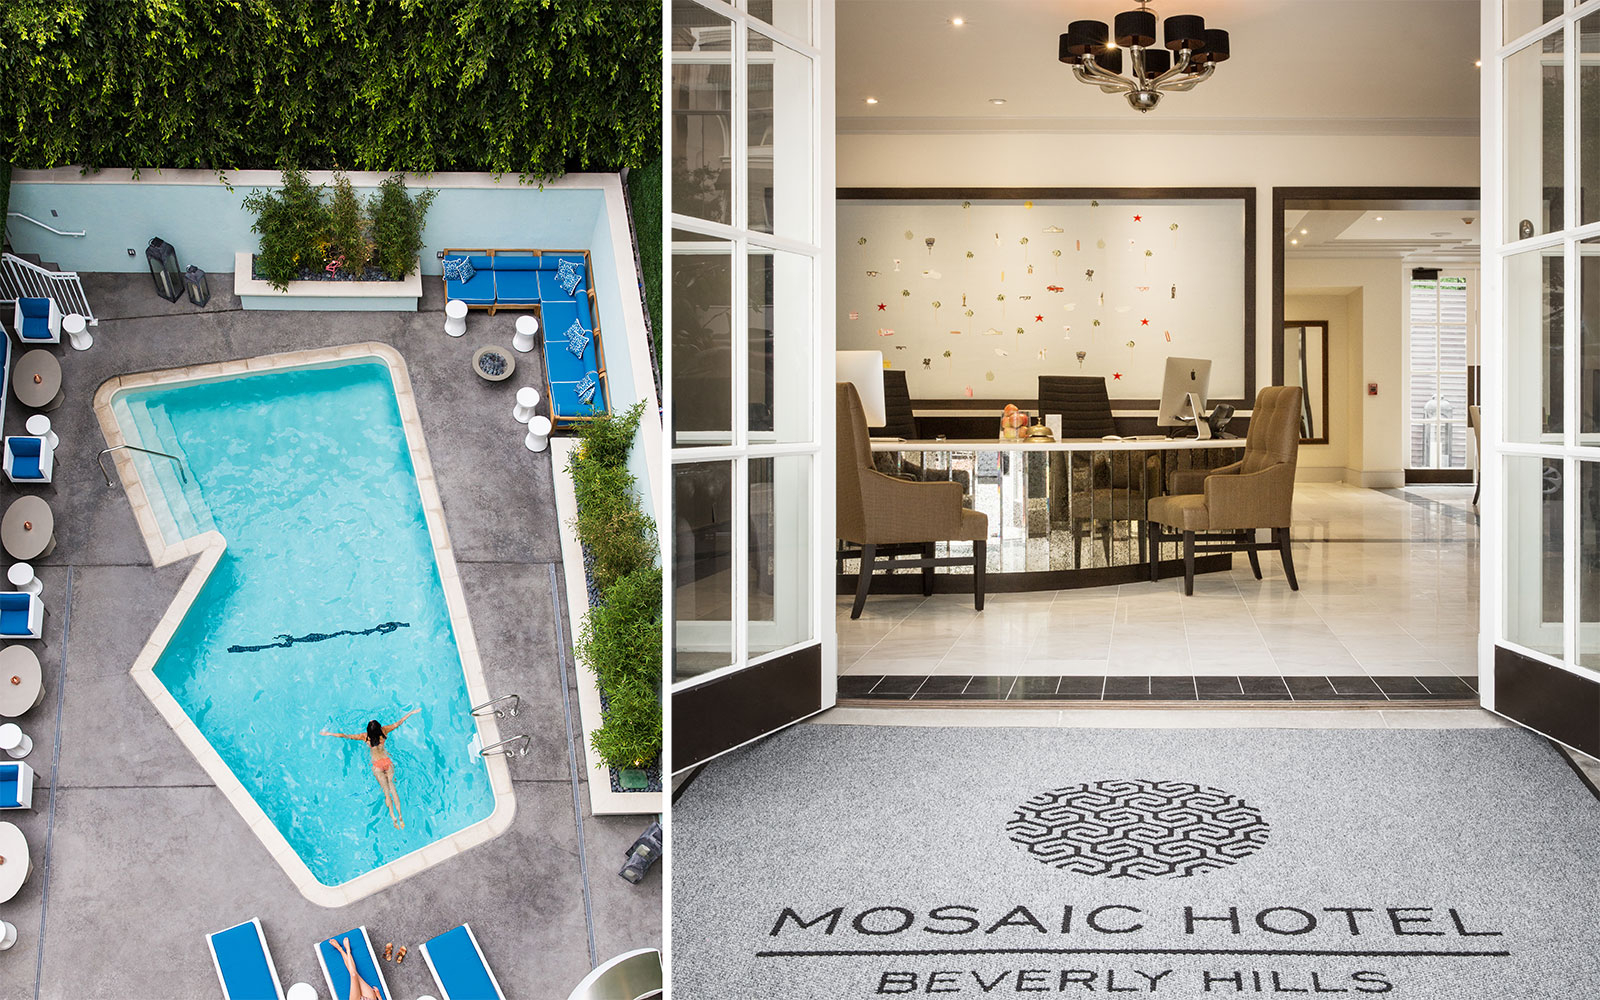 Beverly Hills Buzz: The Mosaic Hotel’s ‘Luxe’ New Look 